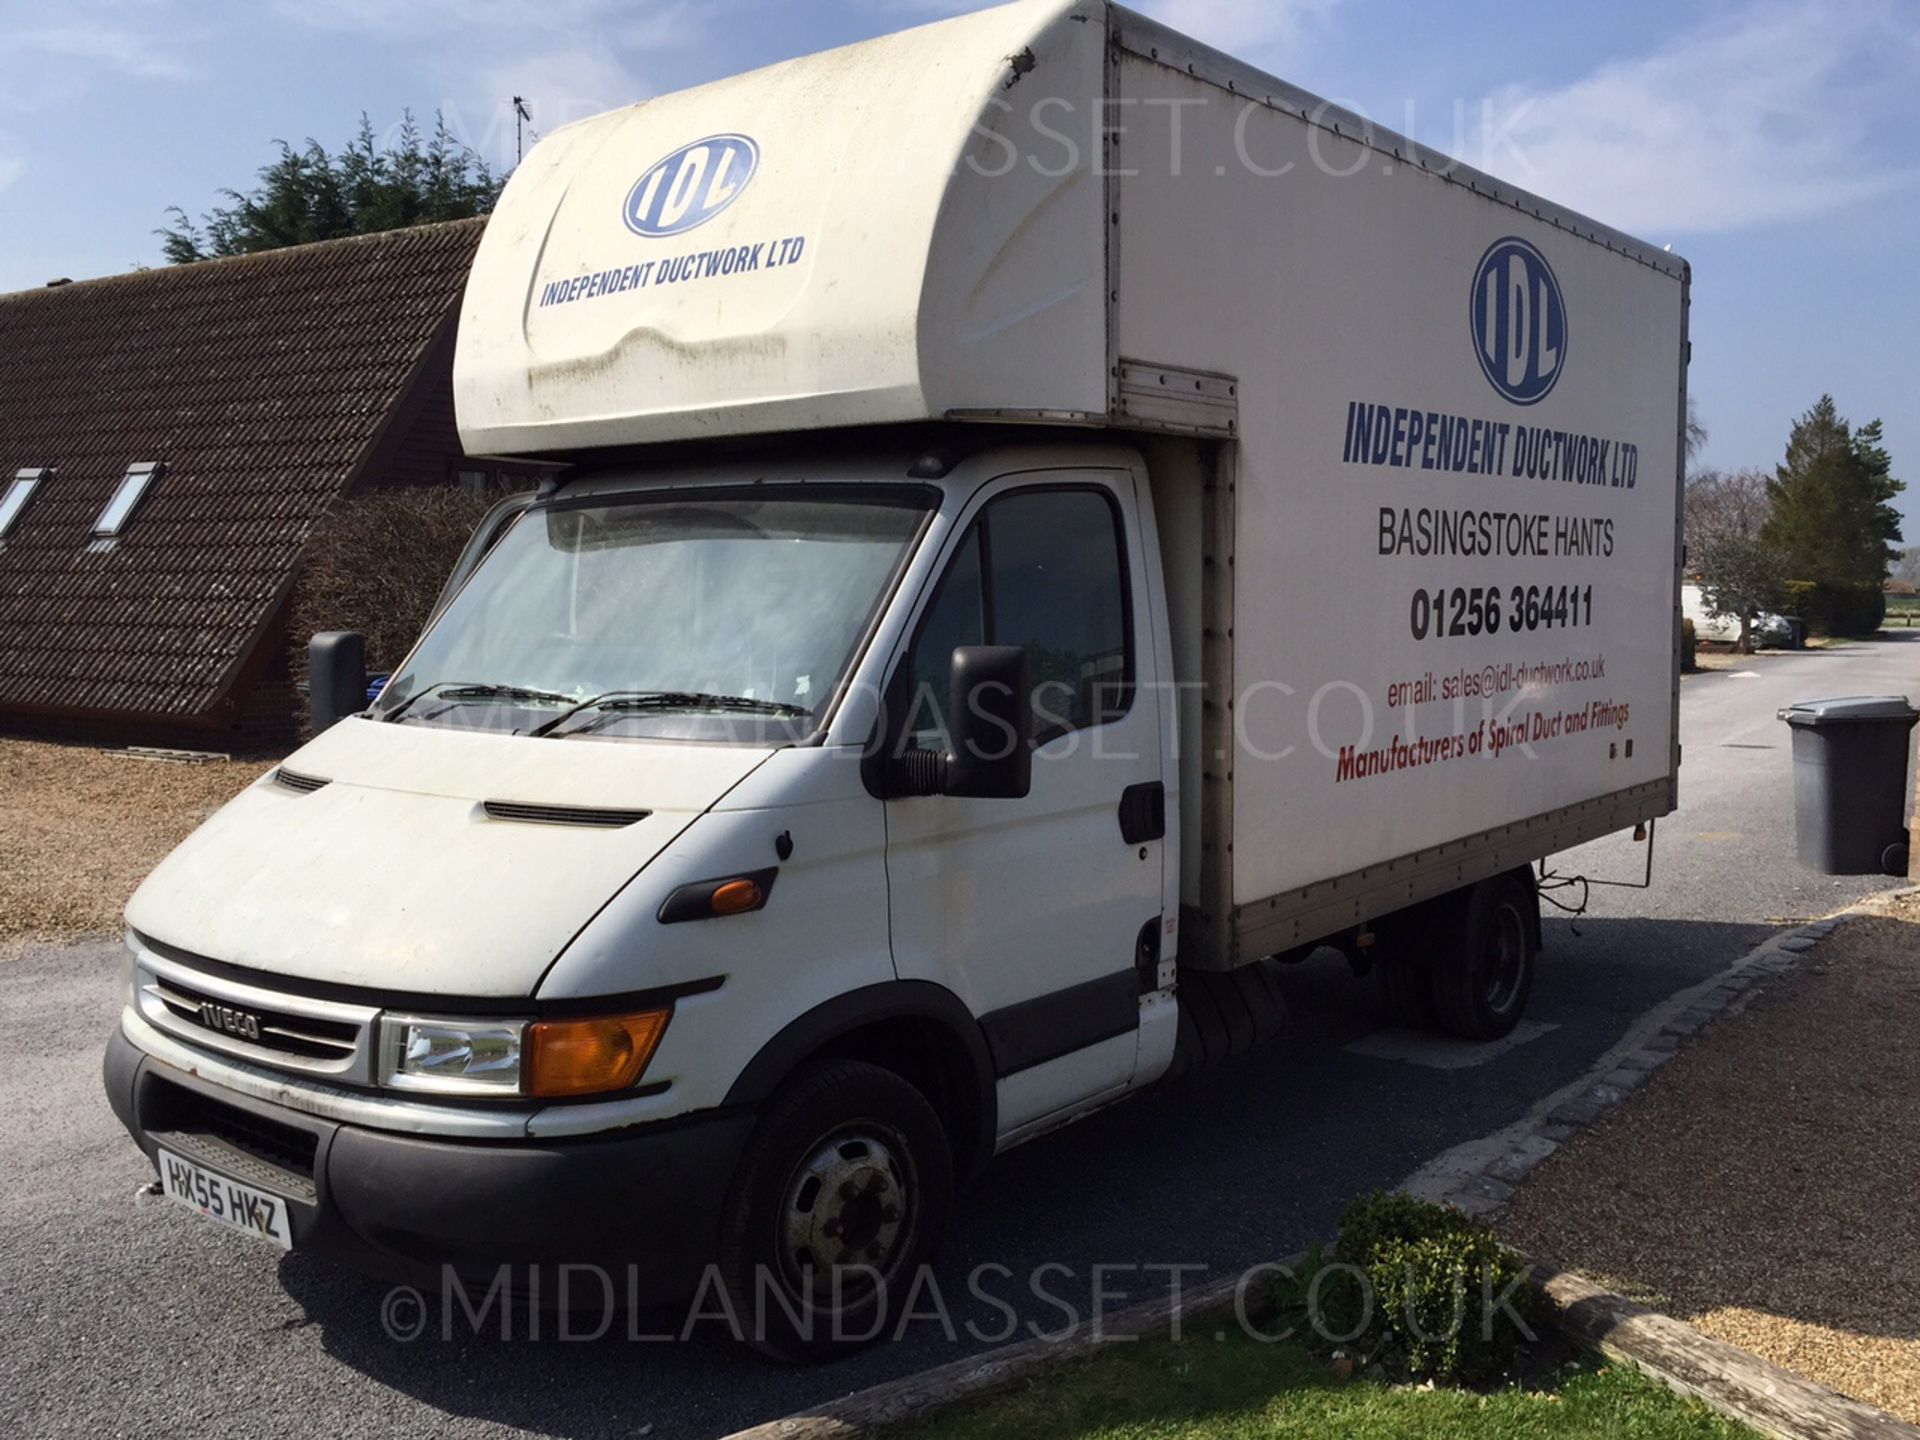 2005/55 REG IVECO DAILY 35C12 LUTON BODY TWIN REAR AXLE COMPANY DIRECT *NO VAT* - Image 2 of 10